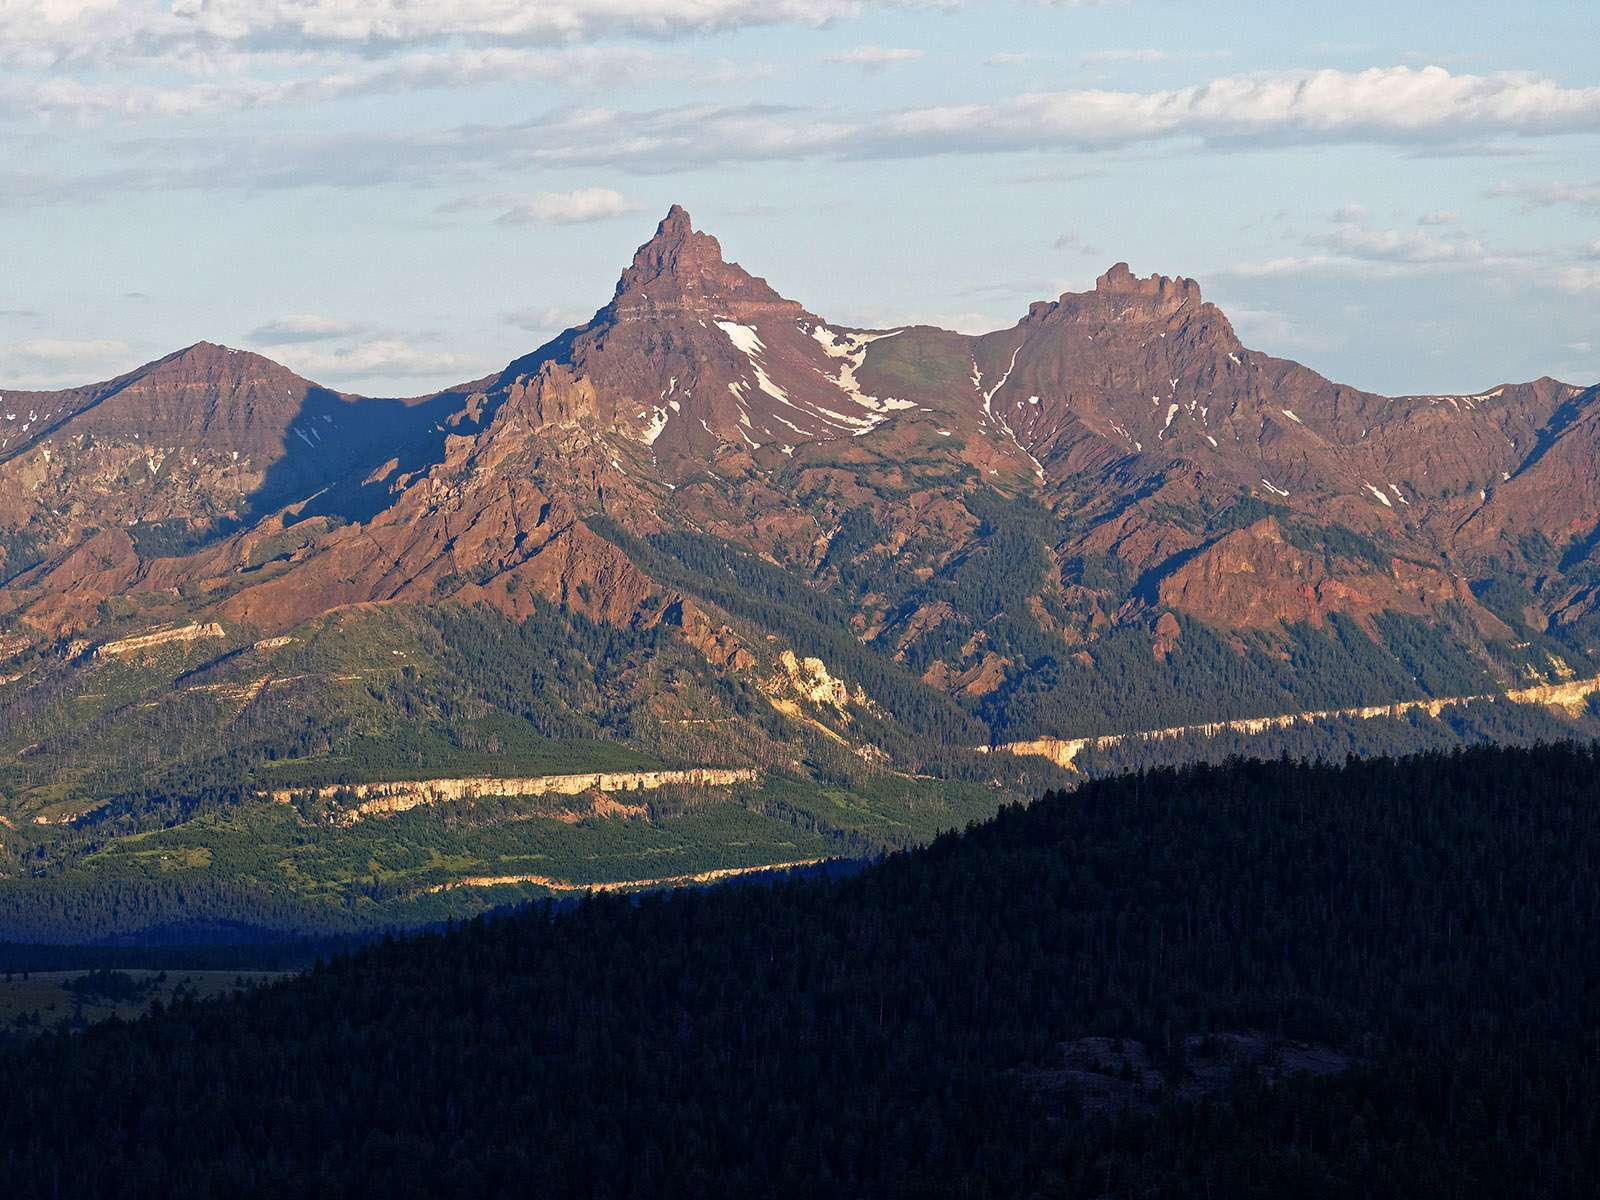 Pilot Peak (center) and Index Peak (right) are glacier-carved peaks of volcanic strata from Absaroka Volcanic activity that occurred 53 to 43.7 MA.  The Absaroka stratovolcanoes eroded and these peaks are eroded remains of Trout peak and Wapiti lava flows of andesite (lava of intermediate silica content).  The off white to light green line below the base of the peaks is the Pilgrim formation of limestone and shale from the late Cambrian period (550 Ma).